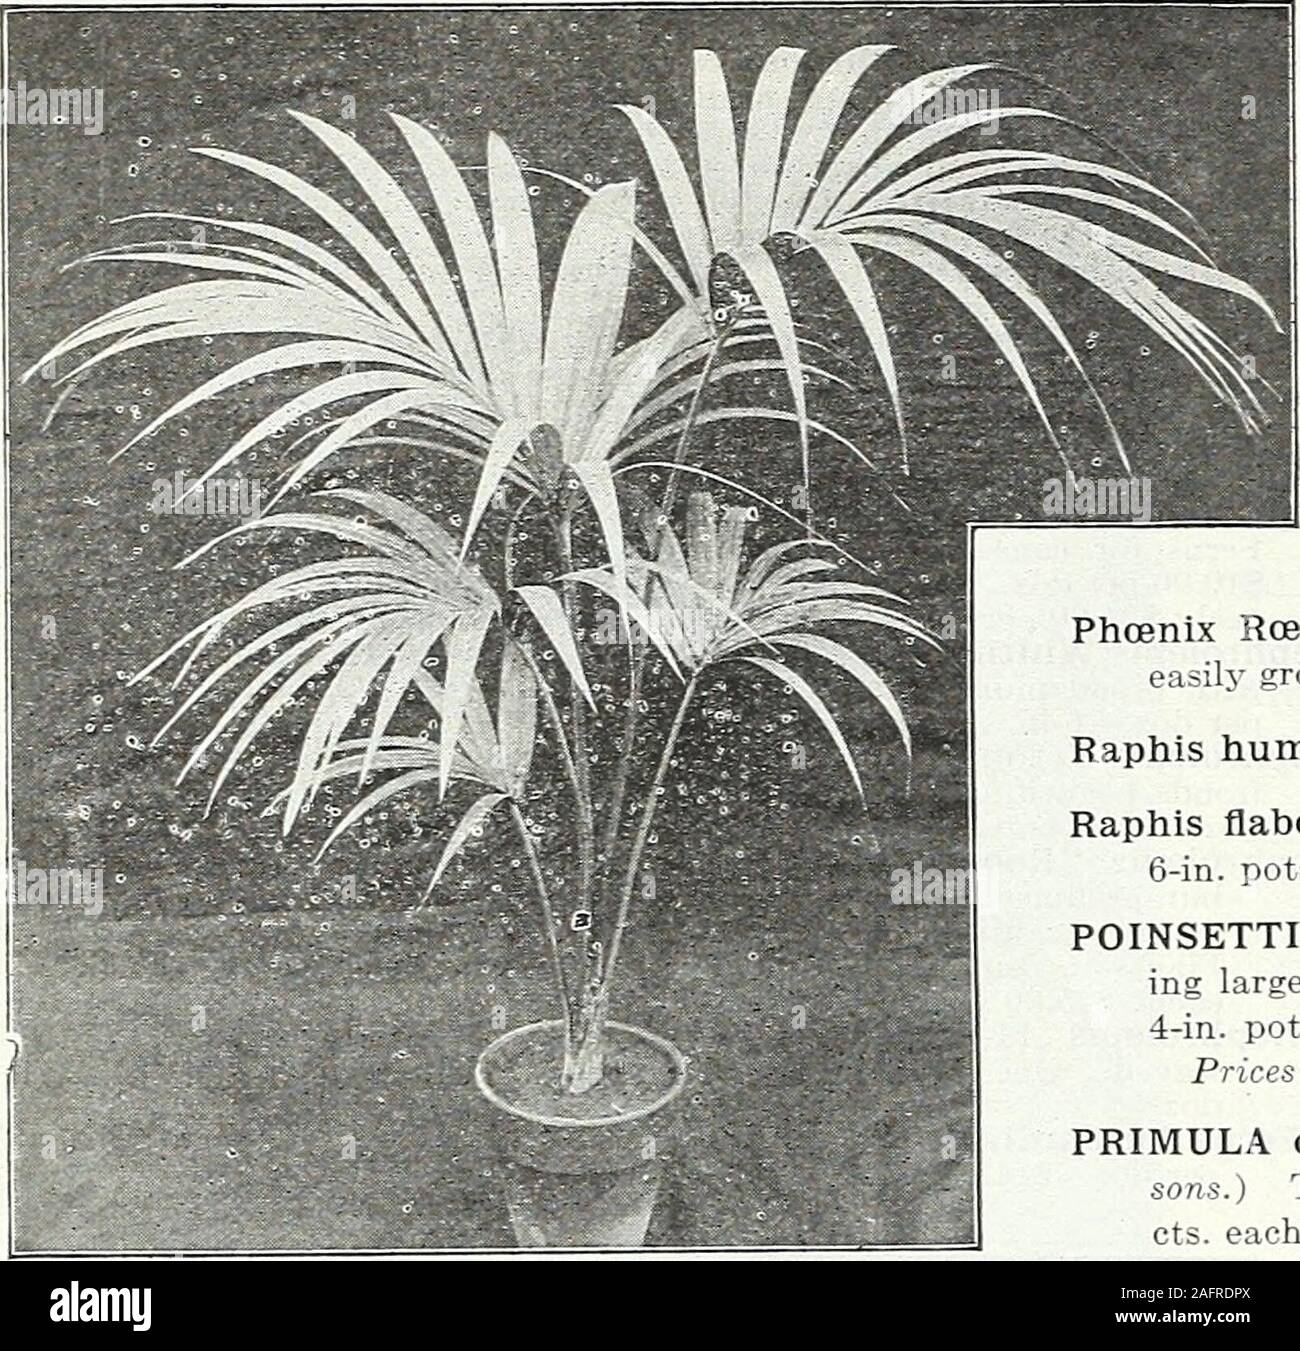 Farquhar's autumn catalogue : 1921. Asplenium nidus-avis. (Birds Nest  Fern.) Erica Wilmoreana. canariensis. A desirable Spring-flowering plant,  producing fragrant, bright golden-yellow flowers in great pro-fusion.  Plants in 5-in. pots, $1.25 each;